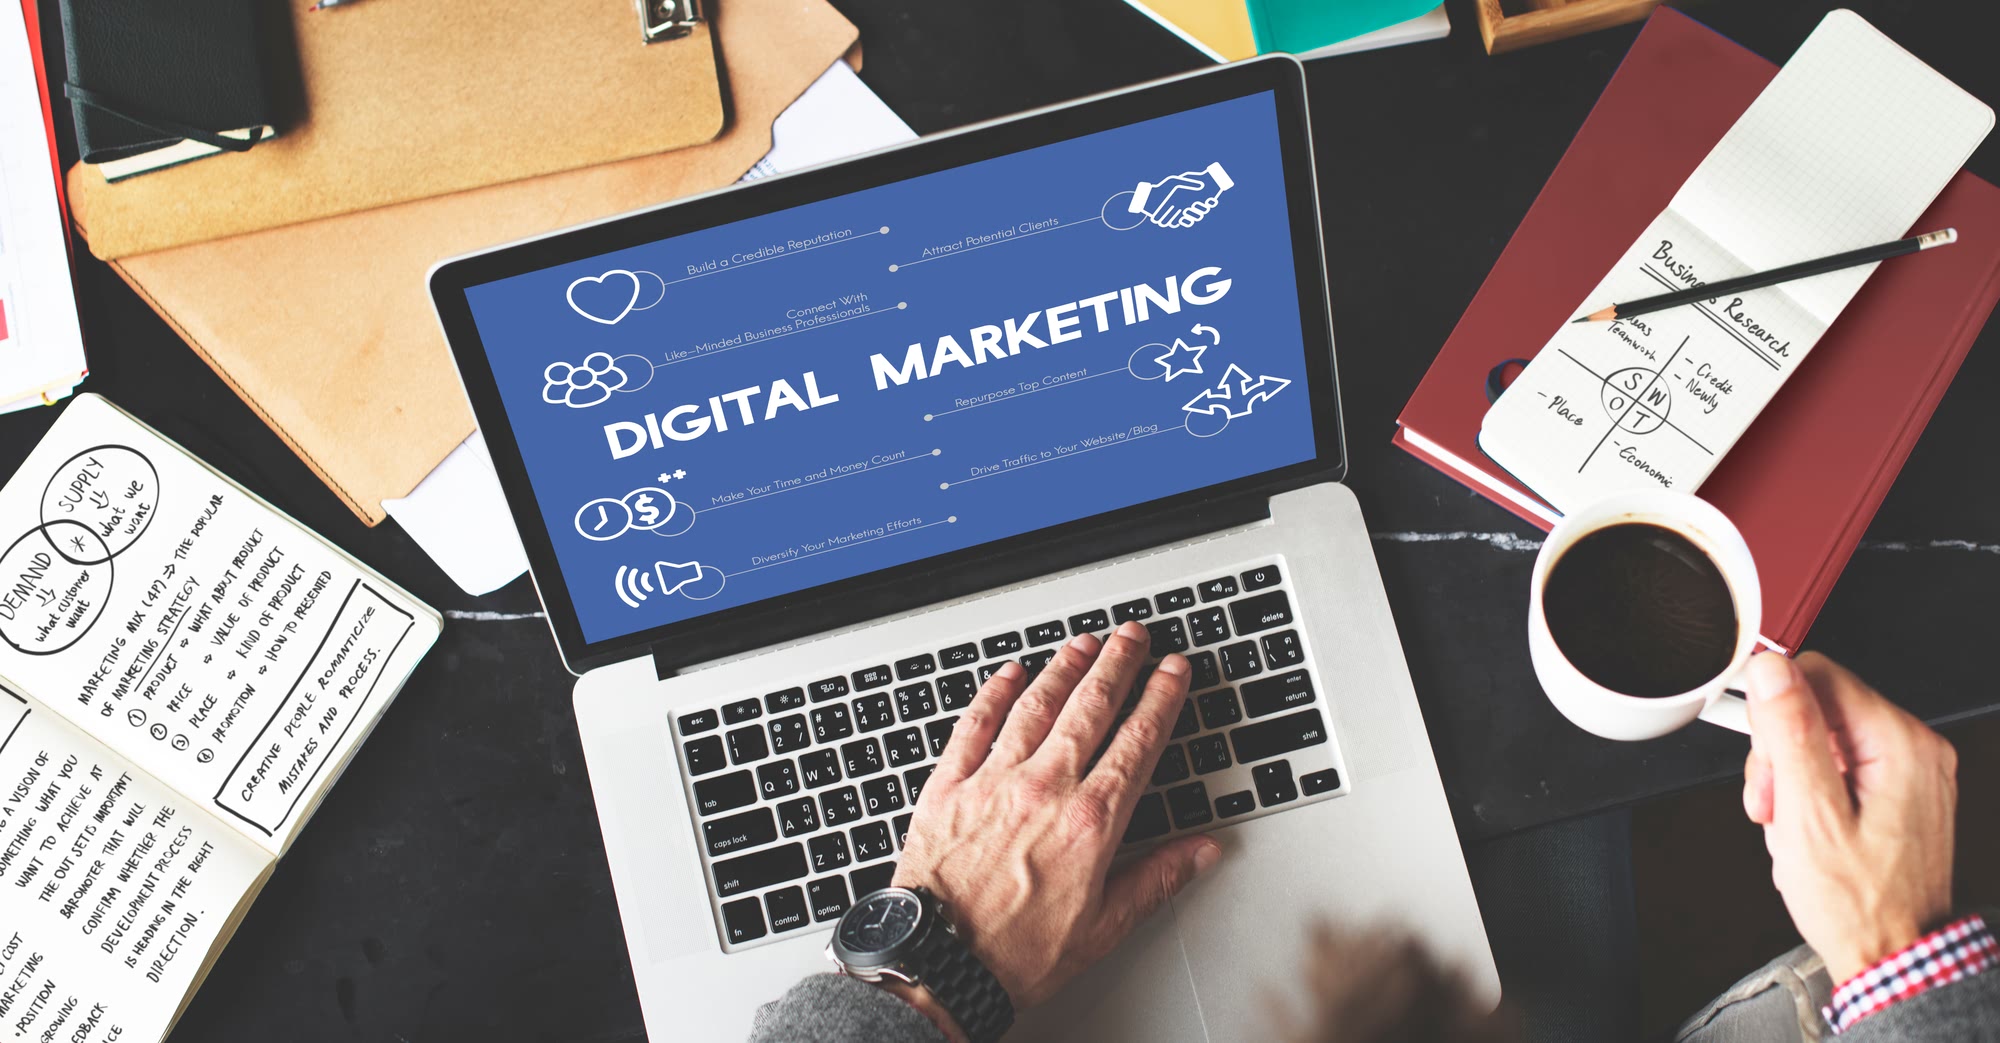 The 5P's of Digital Marketing Explained